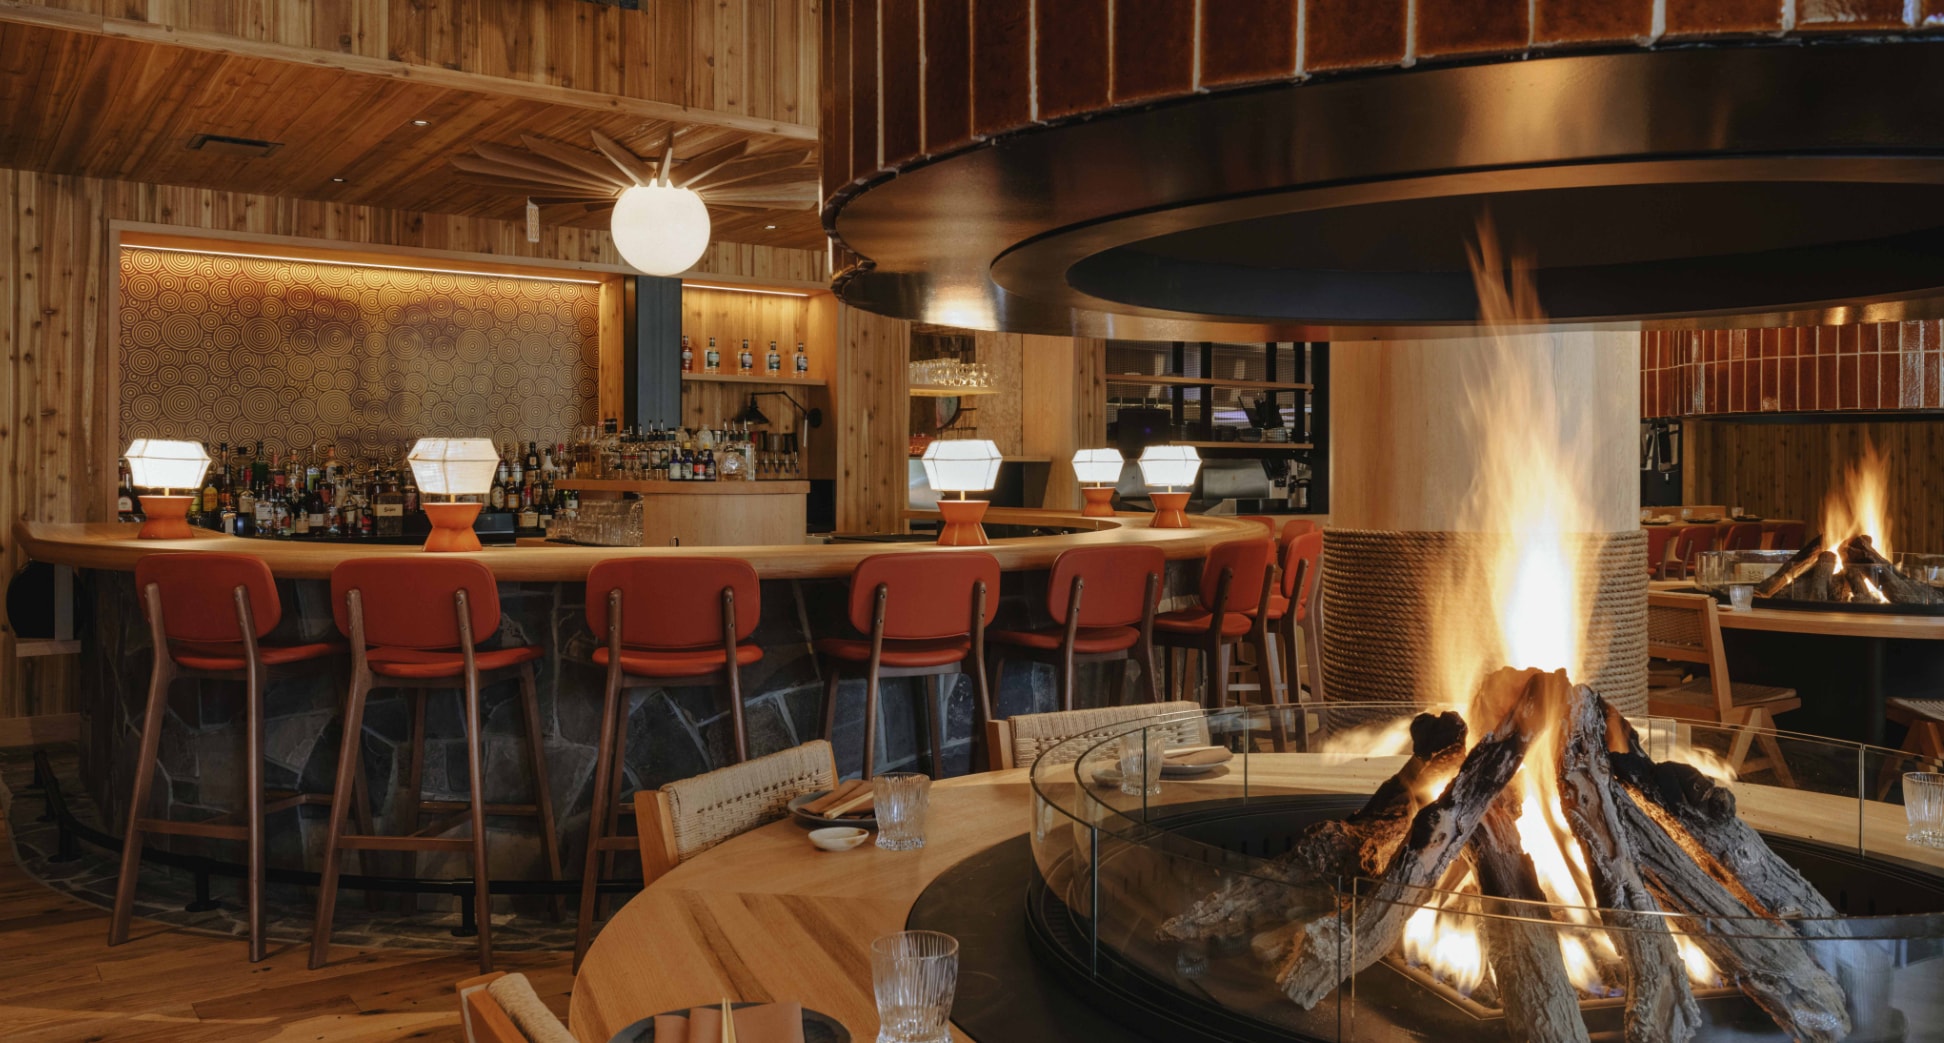 A burning fireplace in the centre of the Hello Sunshine restaurant is surrounded by wicker chairs and set dining cutlery